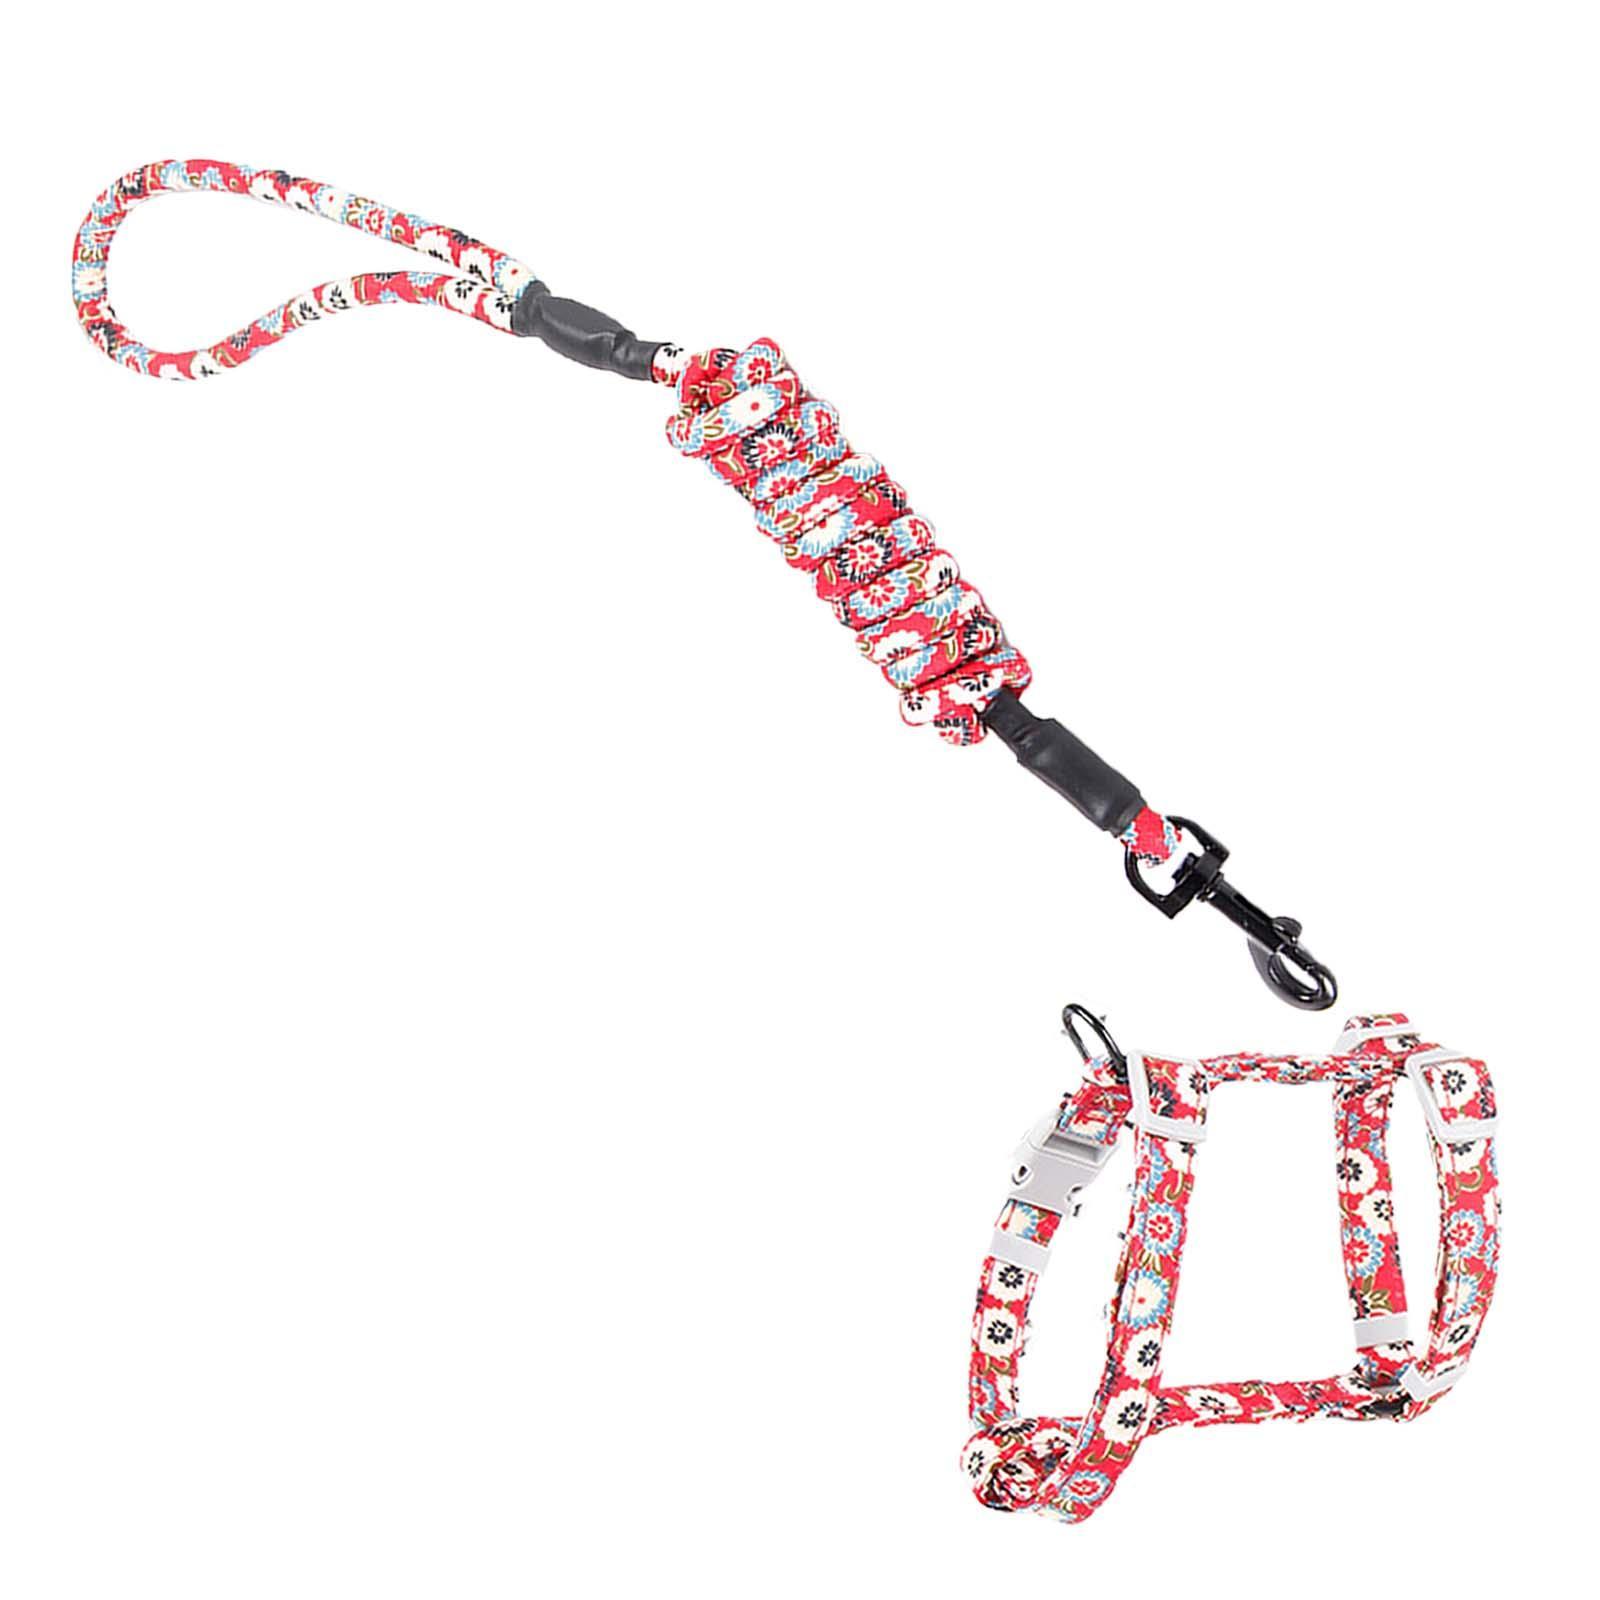 Cat Harness and Leash Soft Adjustable for Large Small Kittens Vest Harnesses